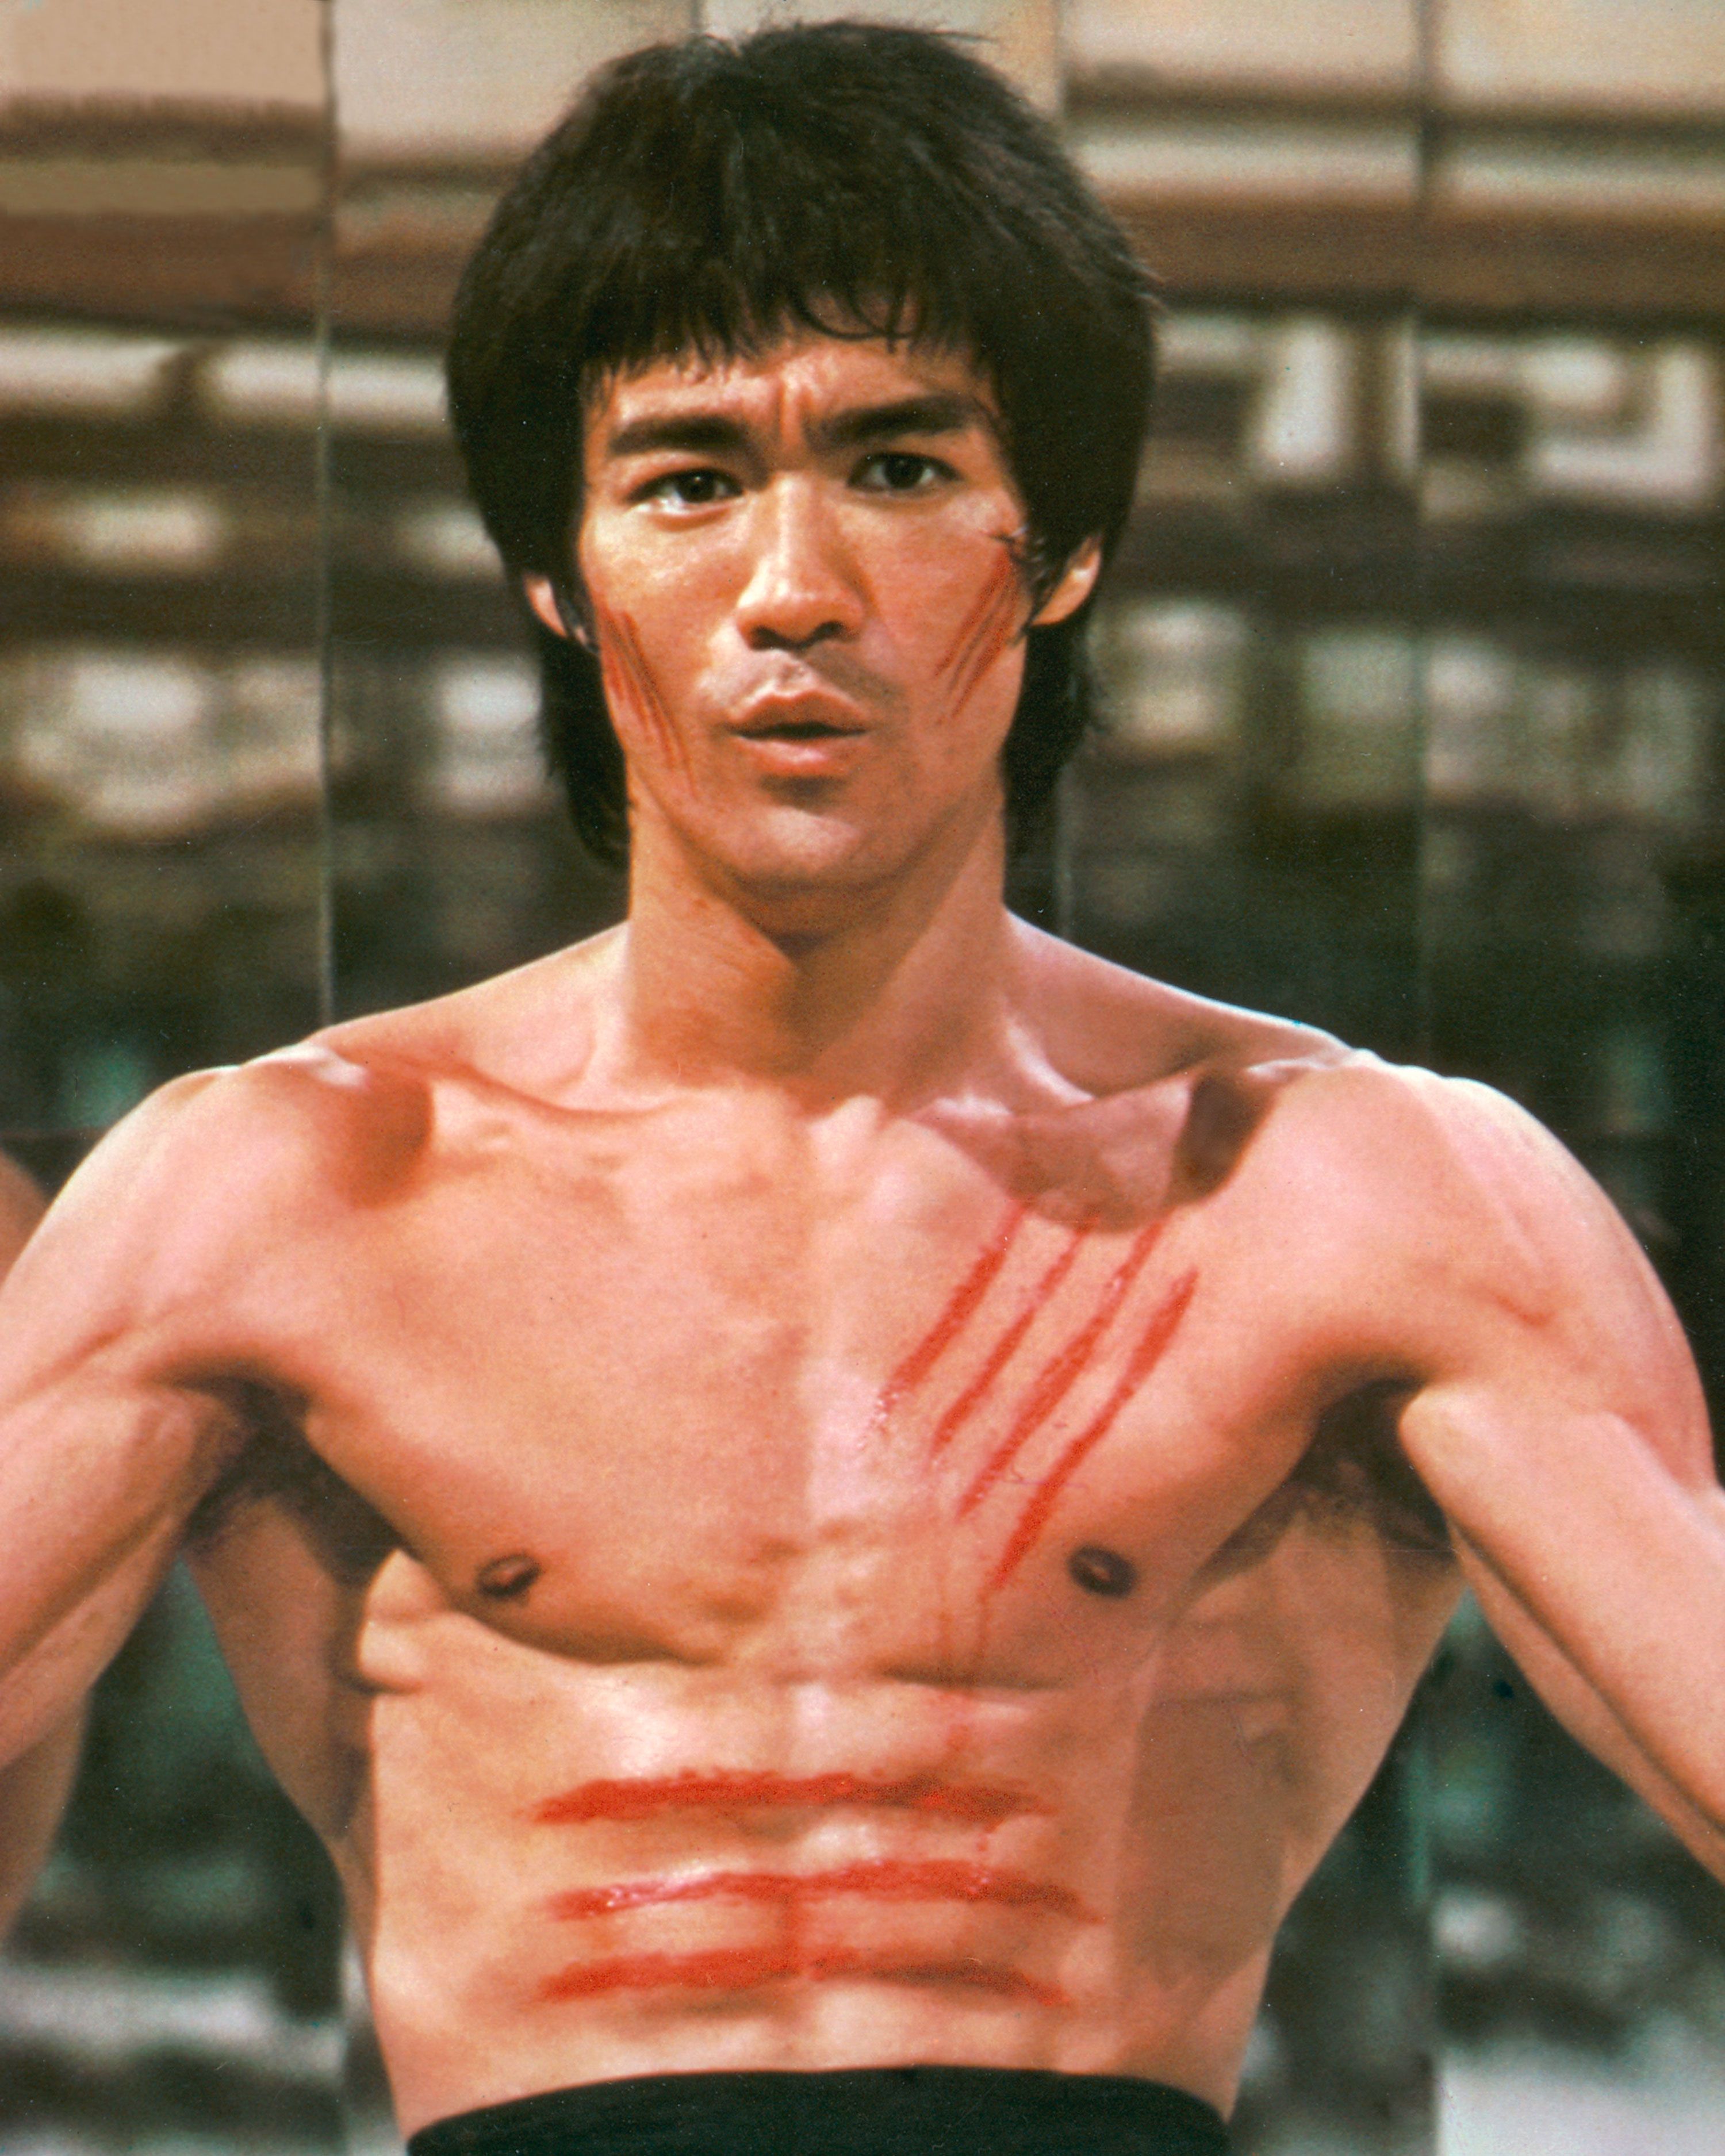 bruce lee enter the dragon full movie in english